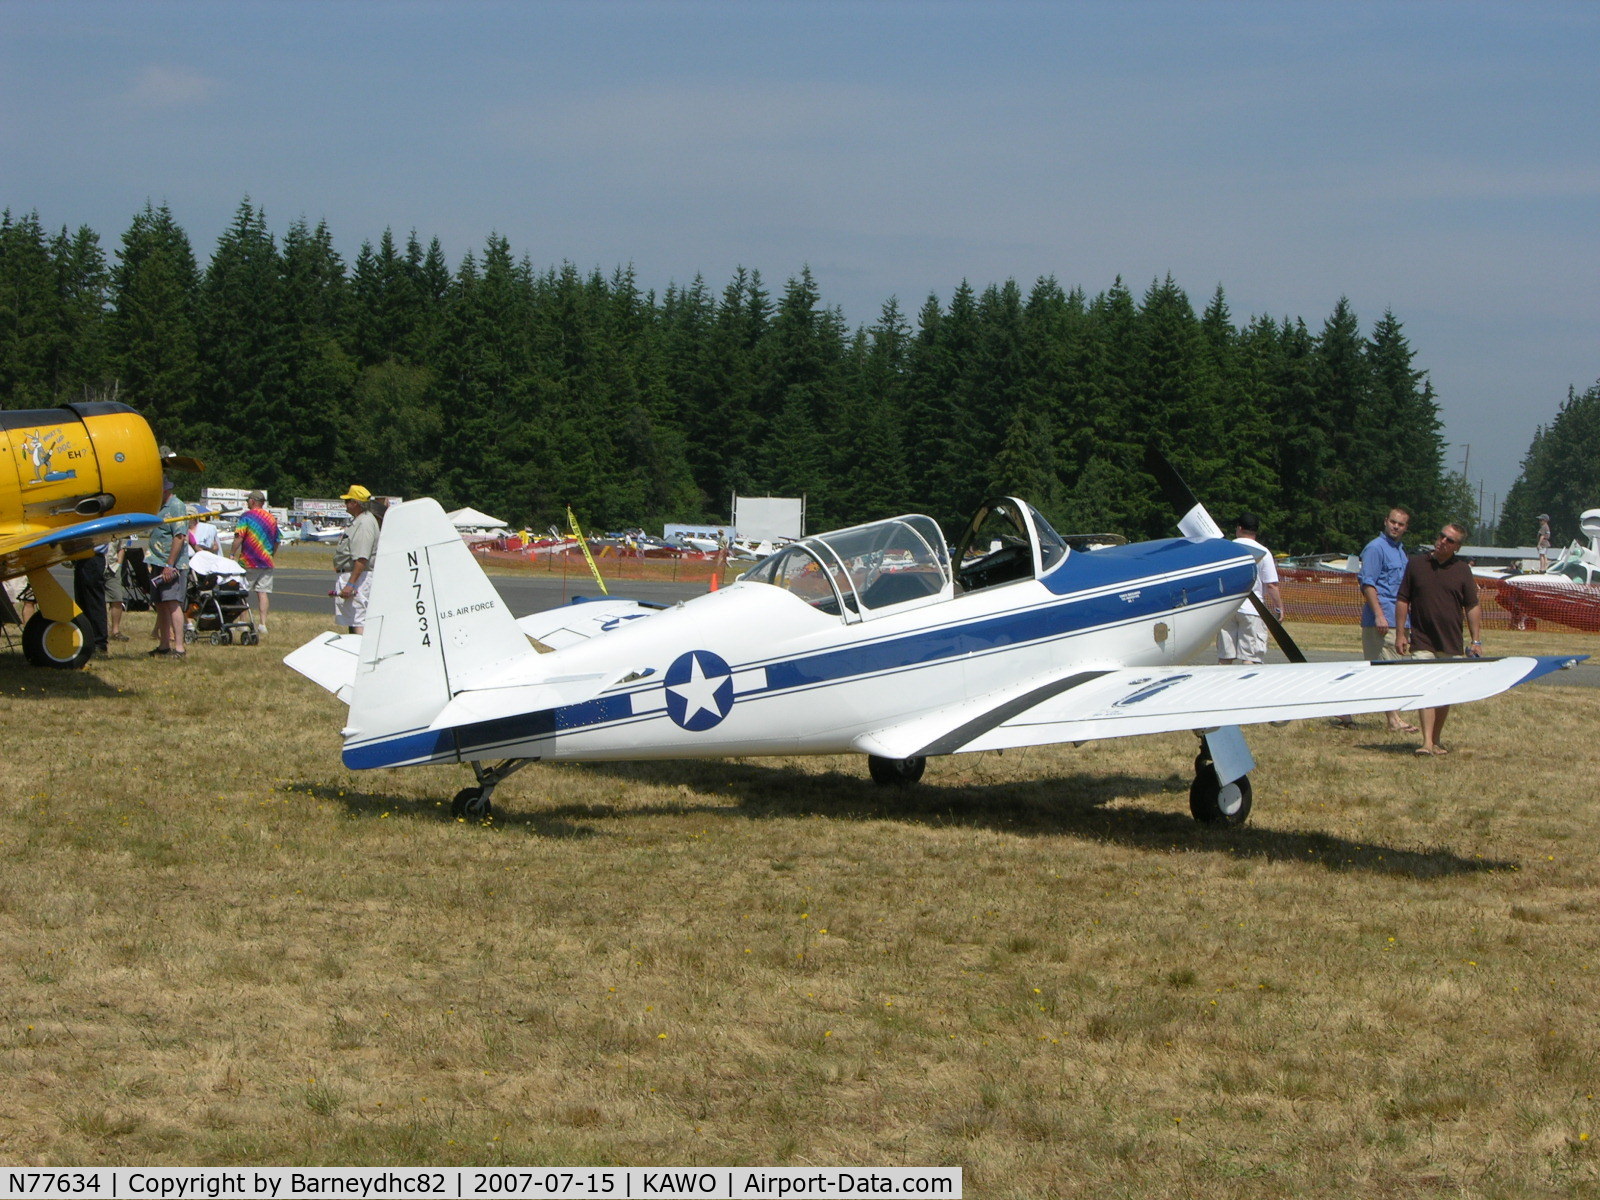 N77634, 1948 Temco TE-1A C/N 6001, Originally a Temco contender lost out to Beech T-34